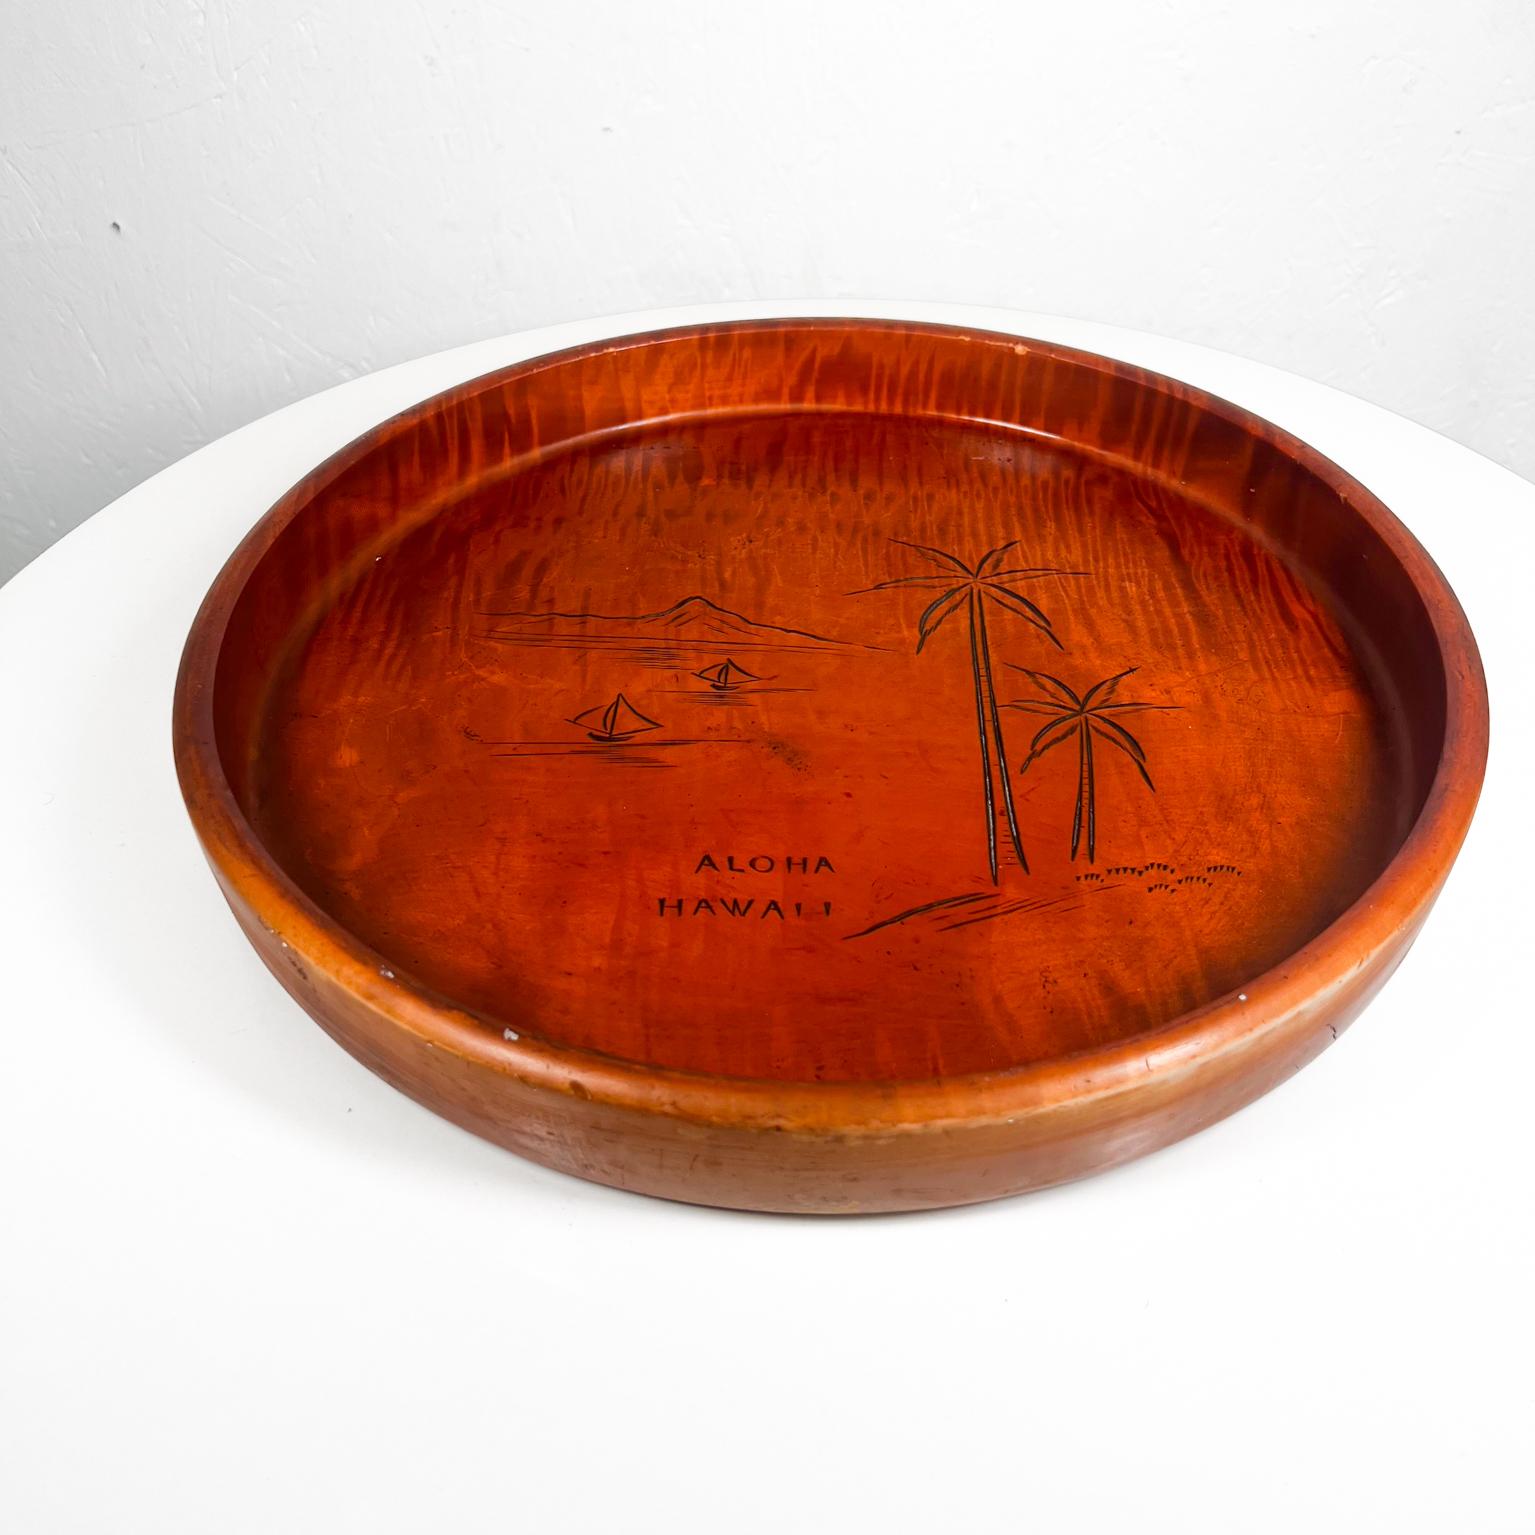 1970s Aloha Hawaii Decorative Round Wood Bar Tray Plate
14.25 w x 14 d x 1.75 h
Preowned original vintage wear.
See all images.


